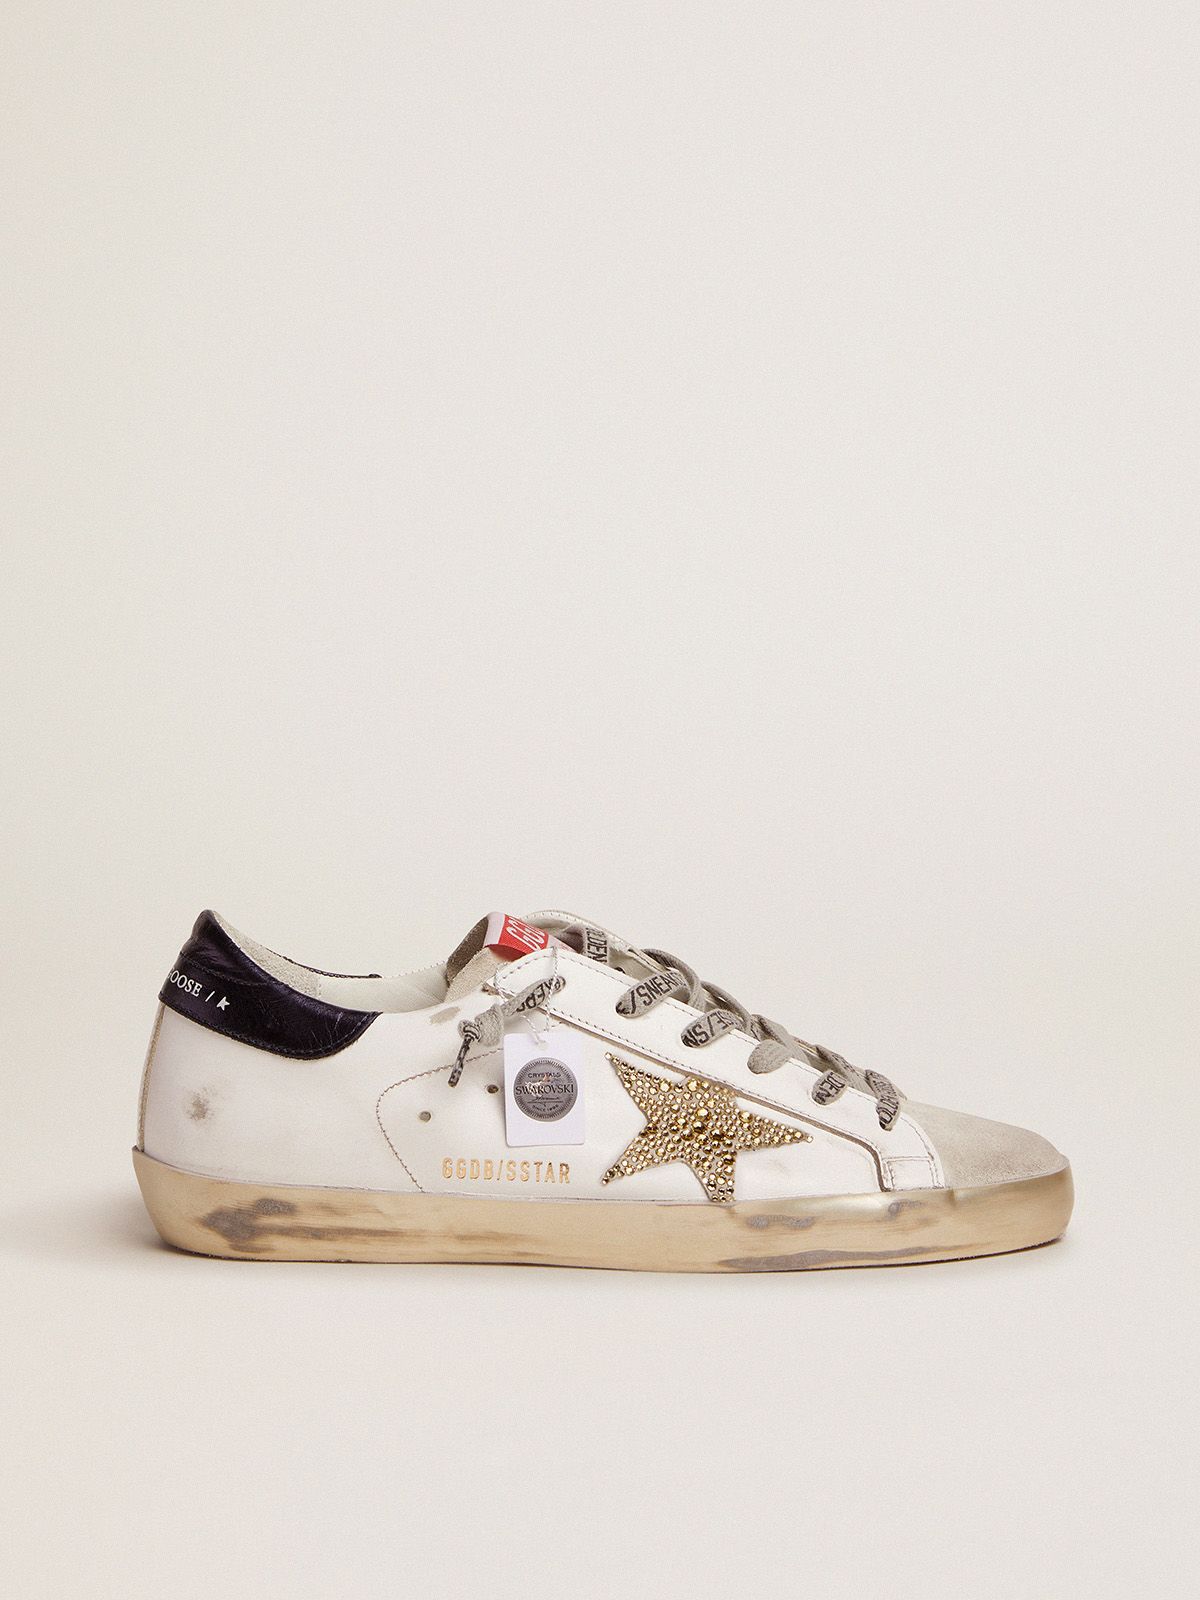 golden goose star laminated LTD leather sneakers tab and with Super-Star Swarovski heel navy-blue crystal